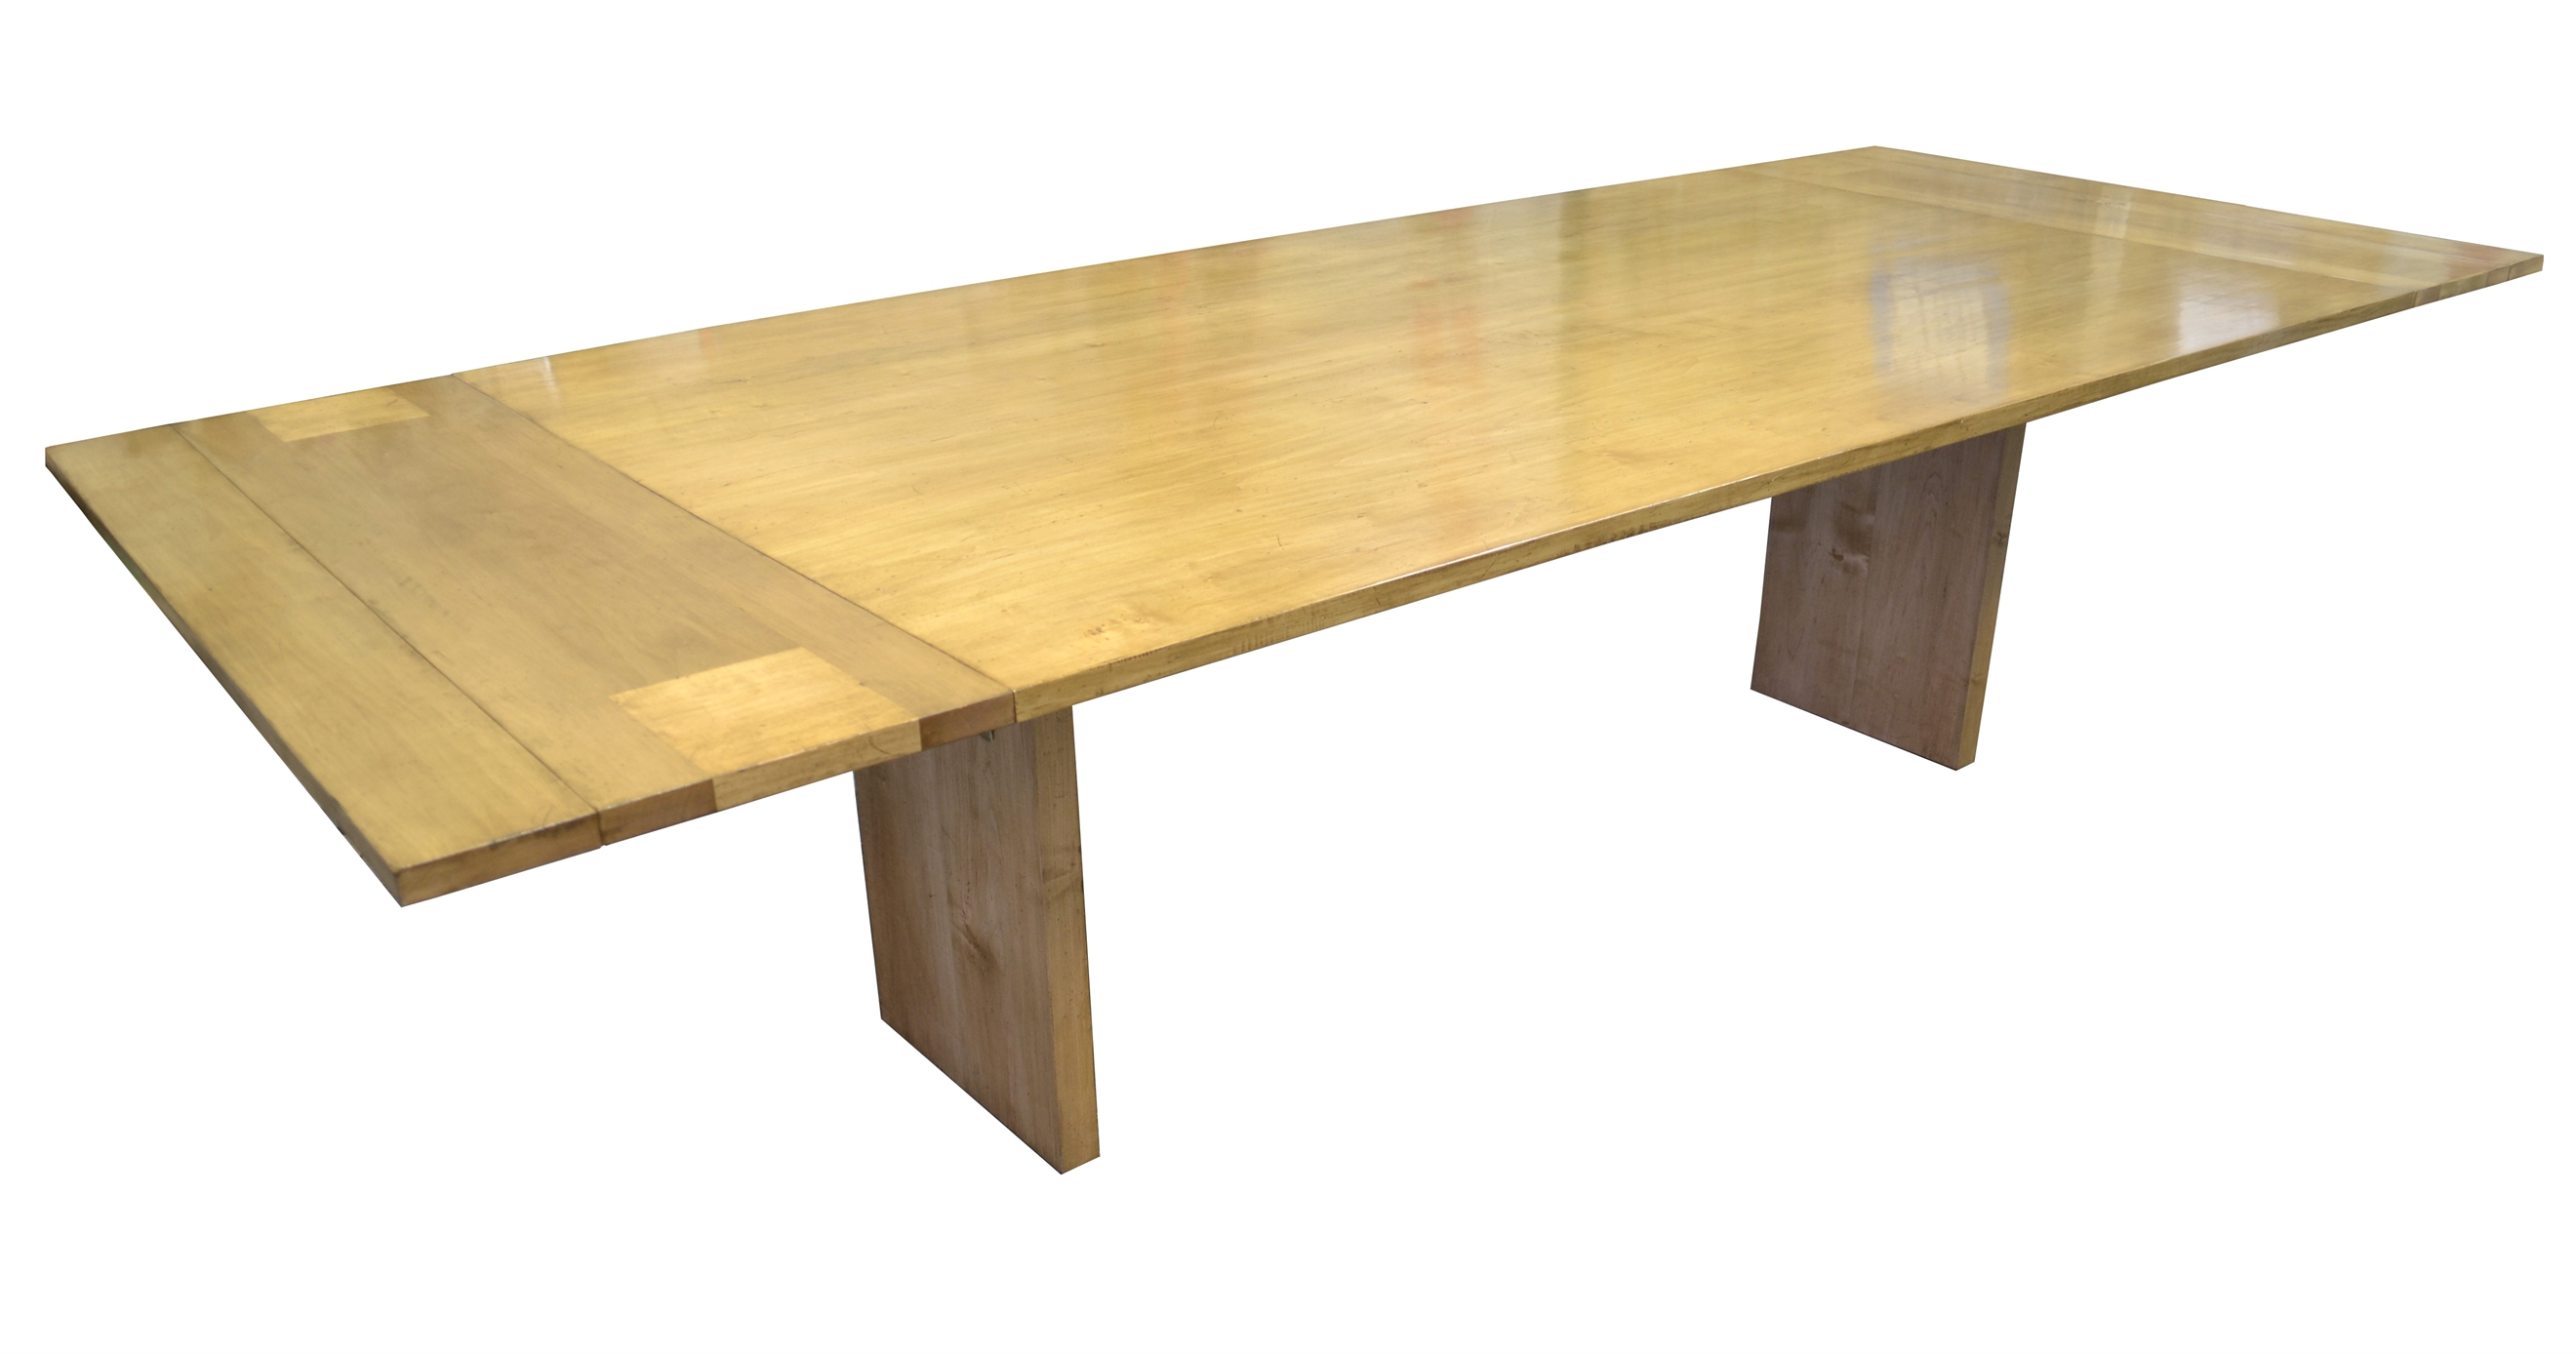 Cubist Maple Dining Table